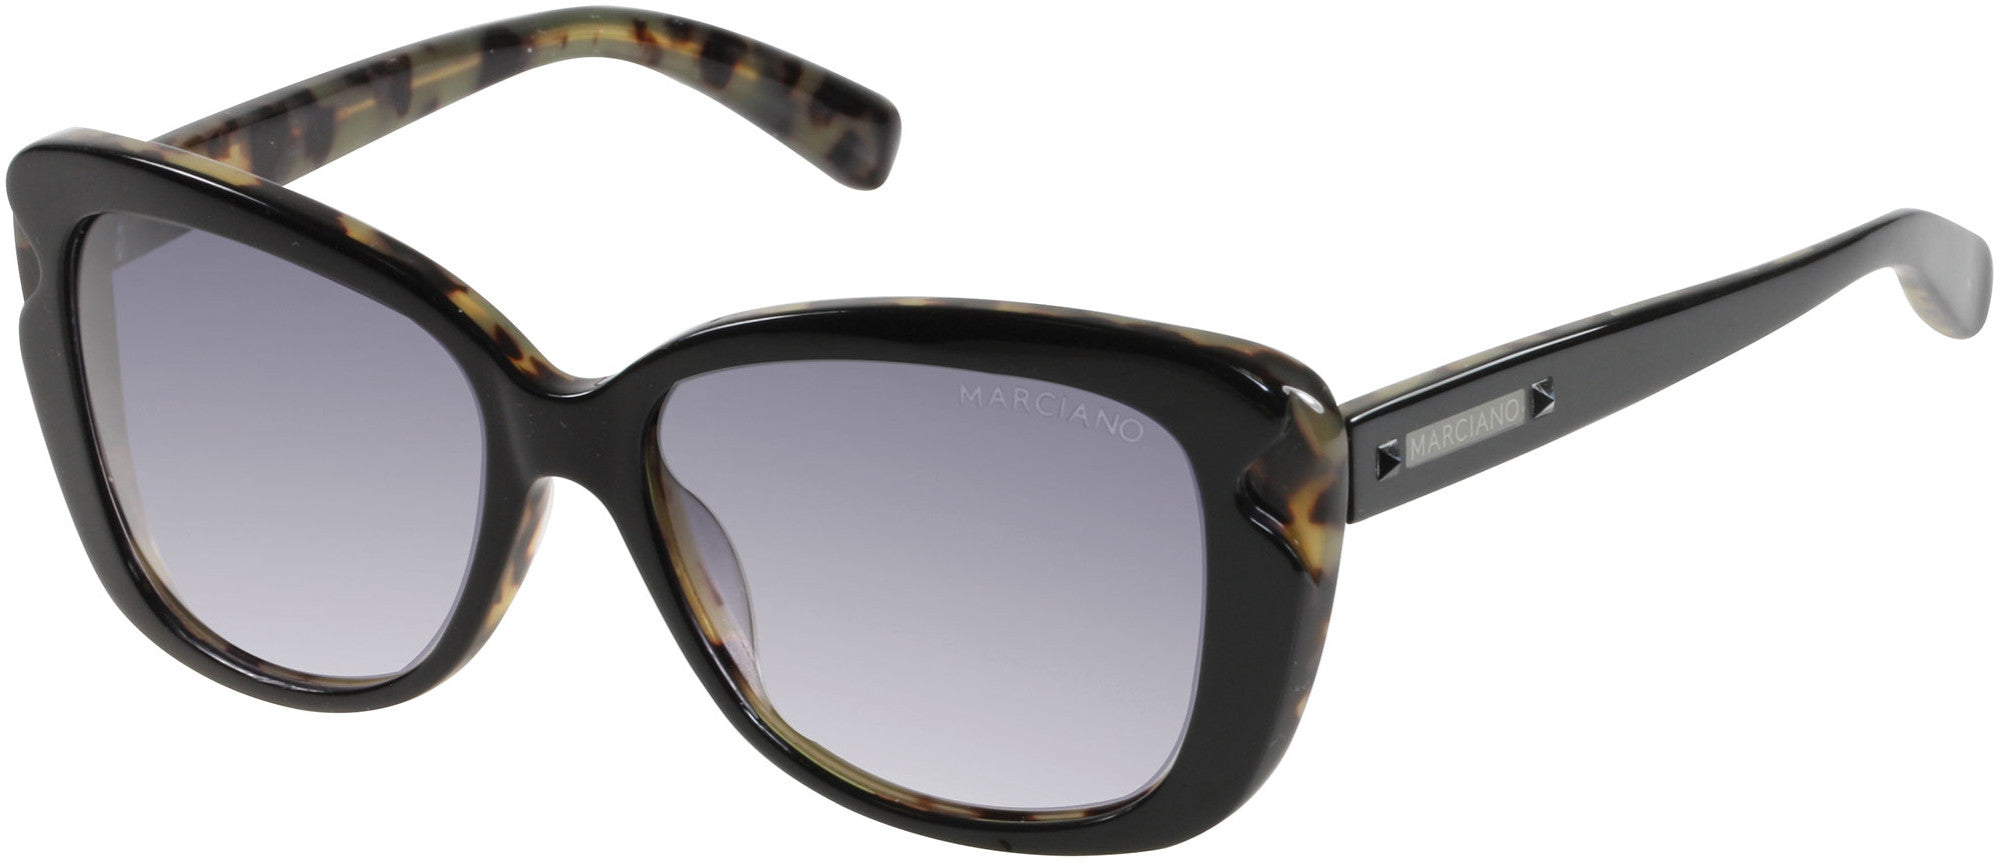 Guess By Marciano GM0711 Sunglasses D46-D46 - Black/ecalle